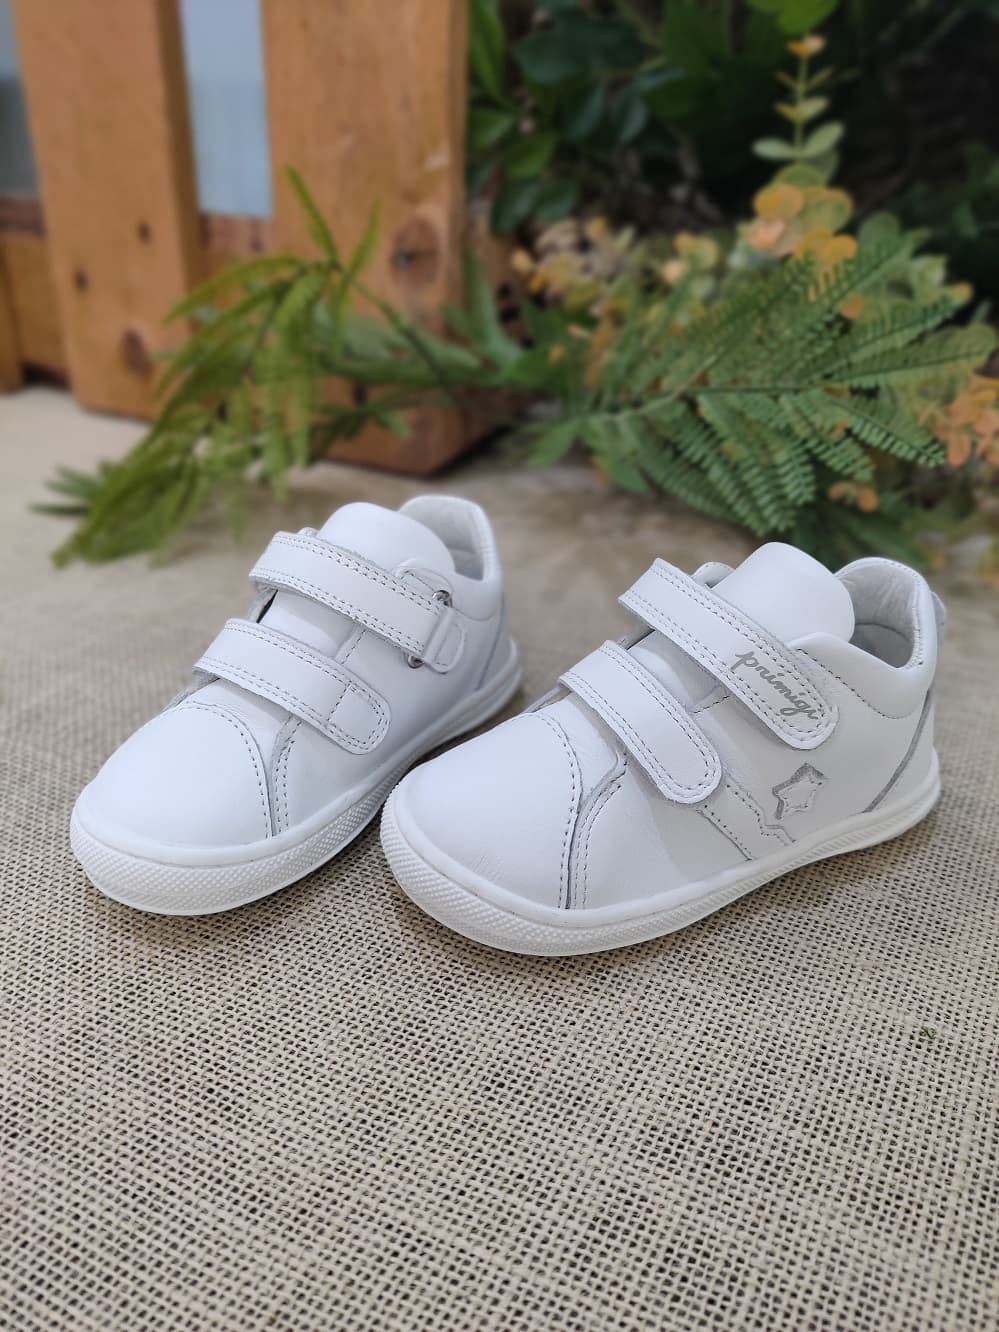 Primigi Soft White Sneakers first steps - Image 4